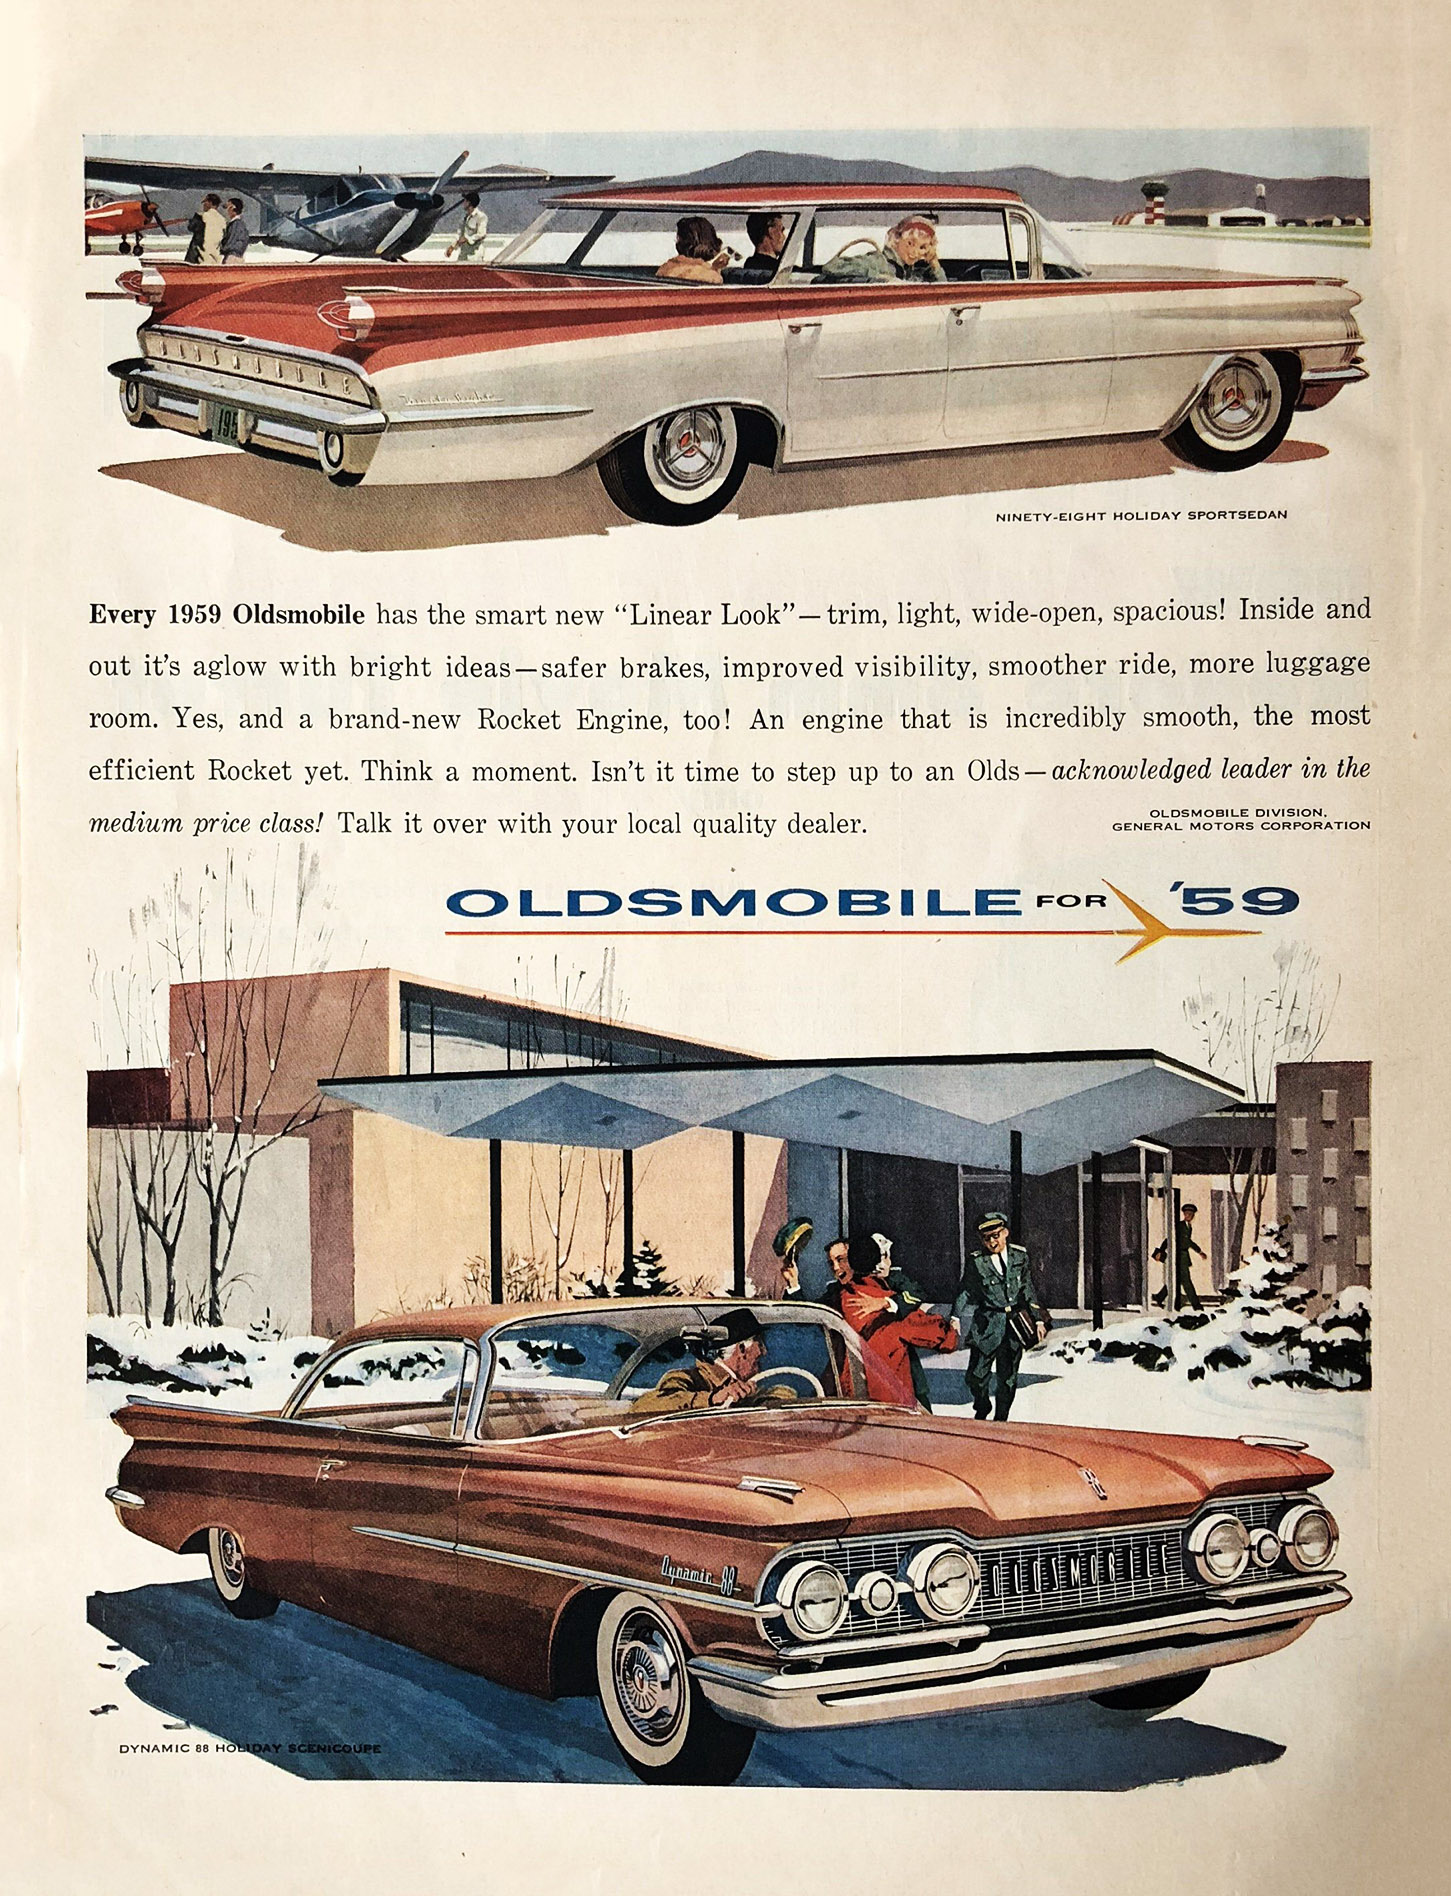 Aviation Madness A Gallery Of Classic Car Ads Featuring